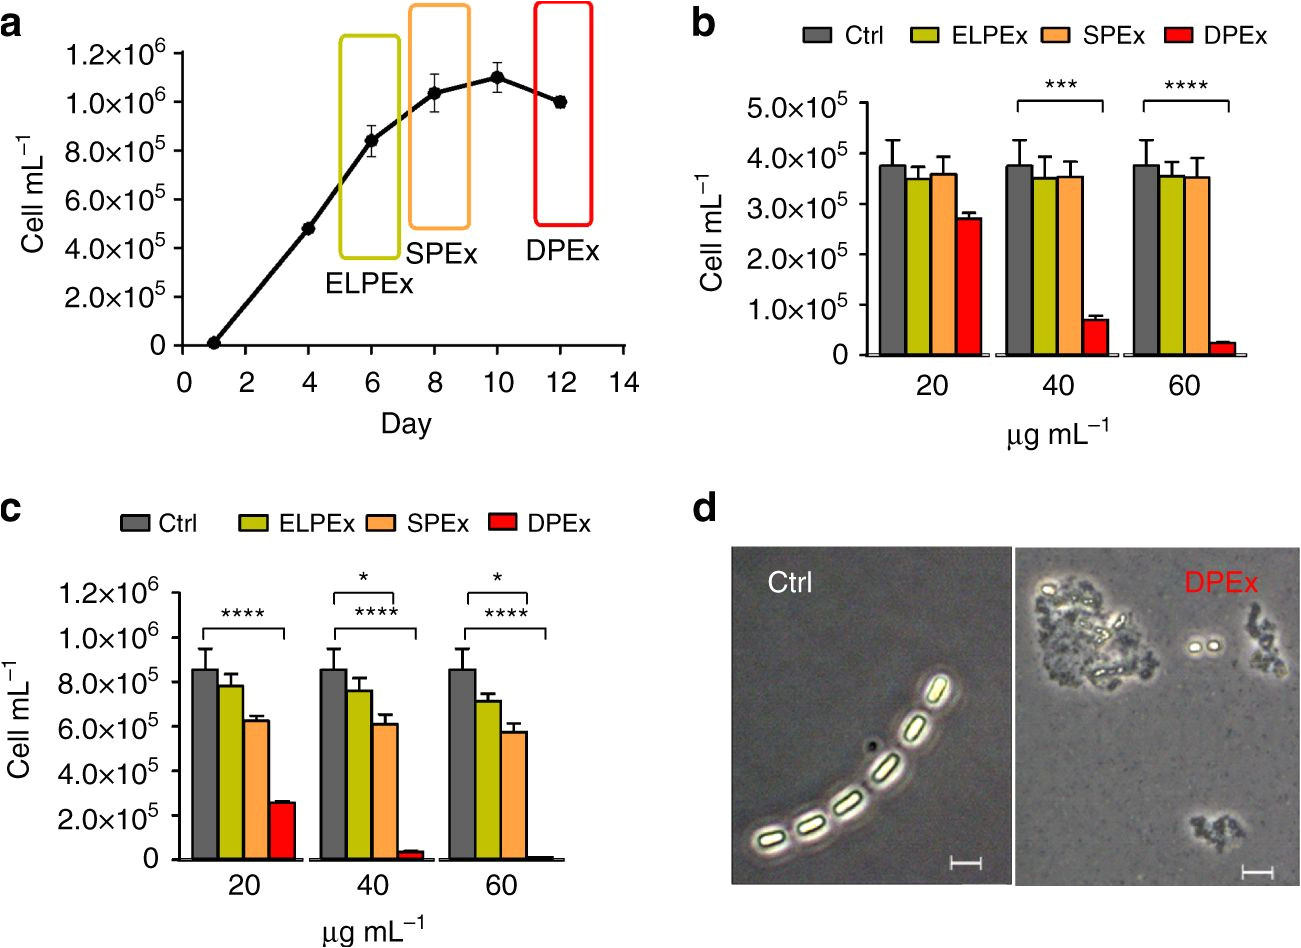 autoinhibitory sterol sulfates mediate programmed cell death in a bloom forming marine diatom nature communications